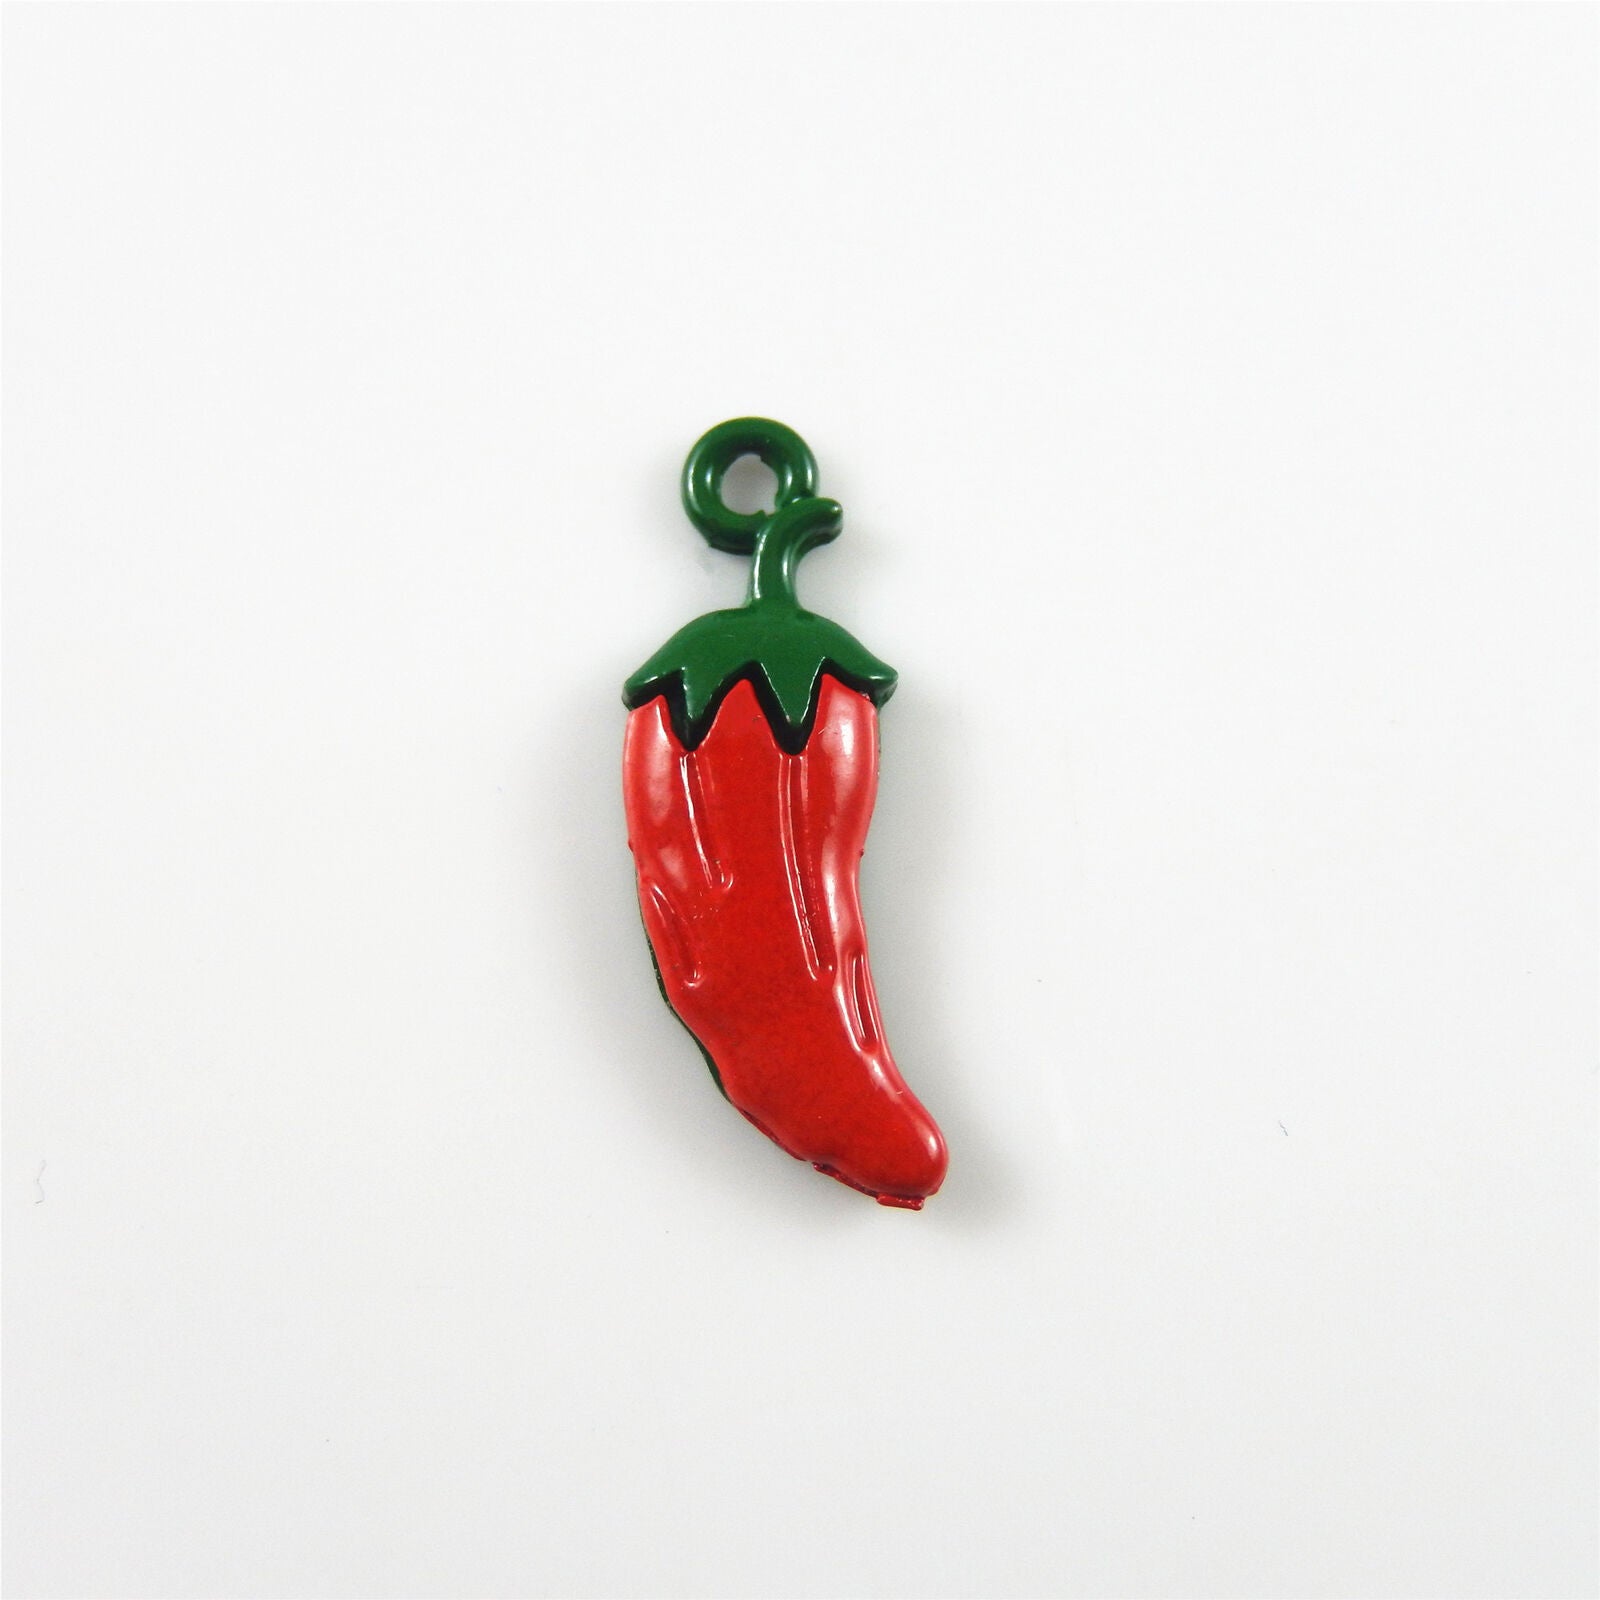 10 pcs Painted Red Alloy Chili Charm Pendant Findings 25x13 mm #52992